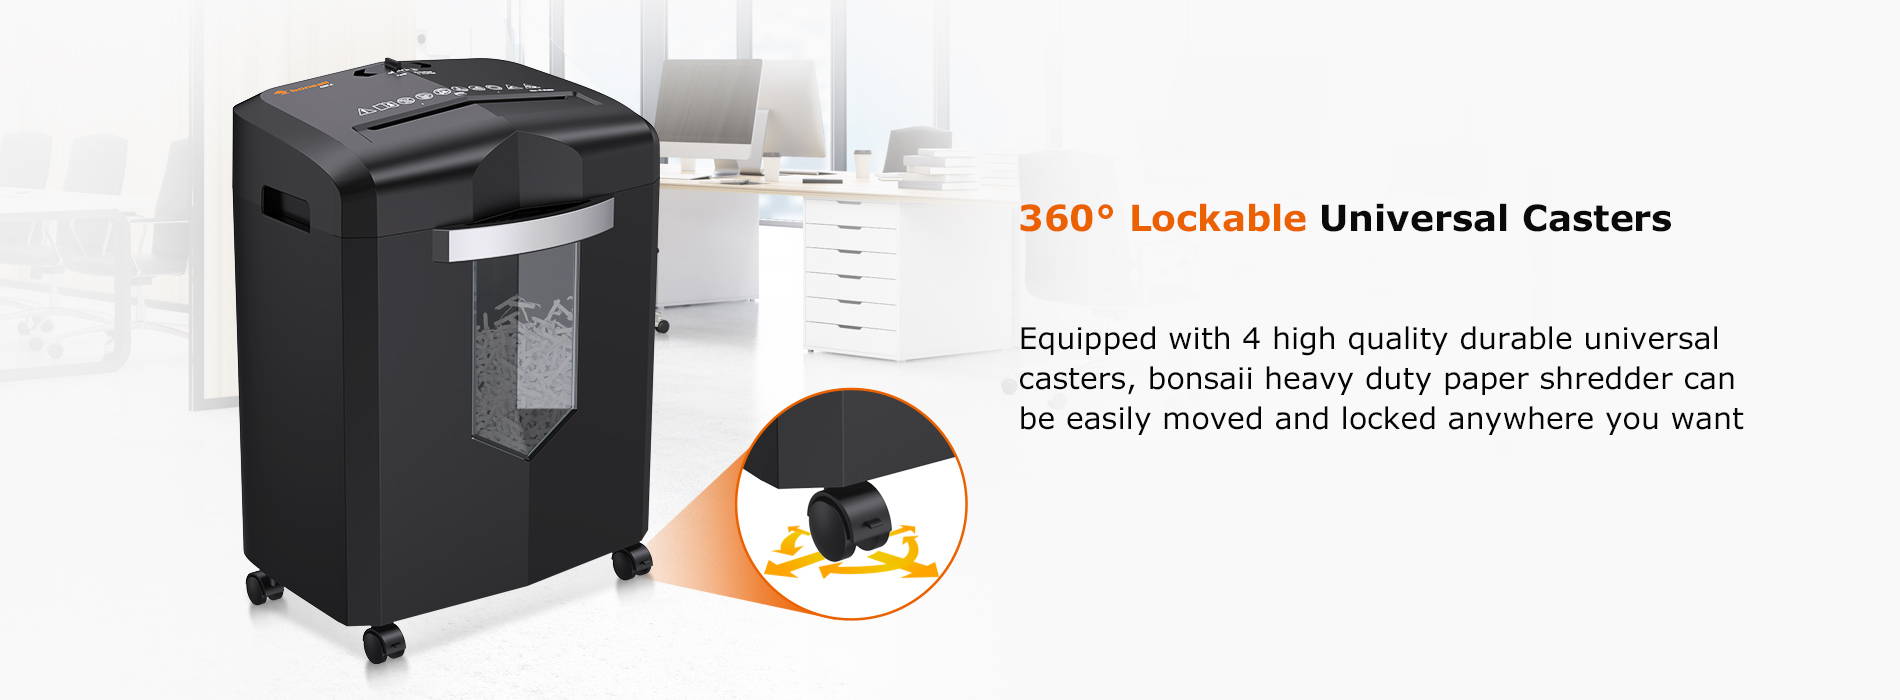 360° Lockable Universal Casters  Equipped with 4 high quality durable universal casters, bonsaii heavy duty paper shredder can be easily moved and locked anywhere you want 